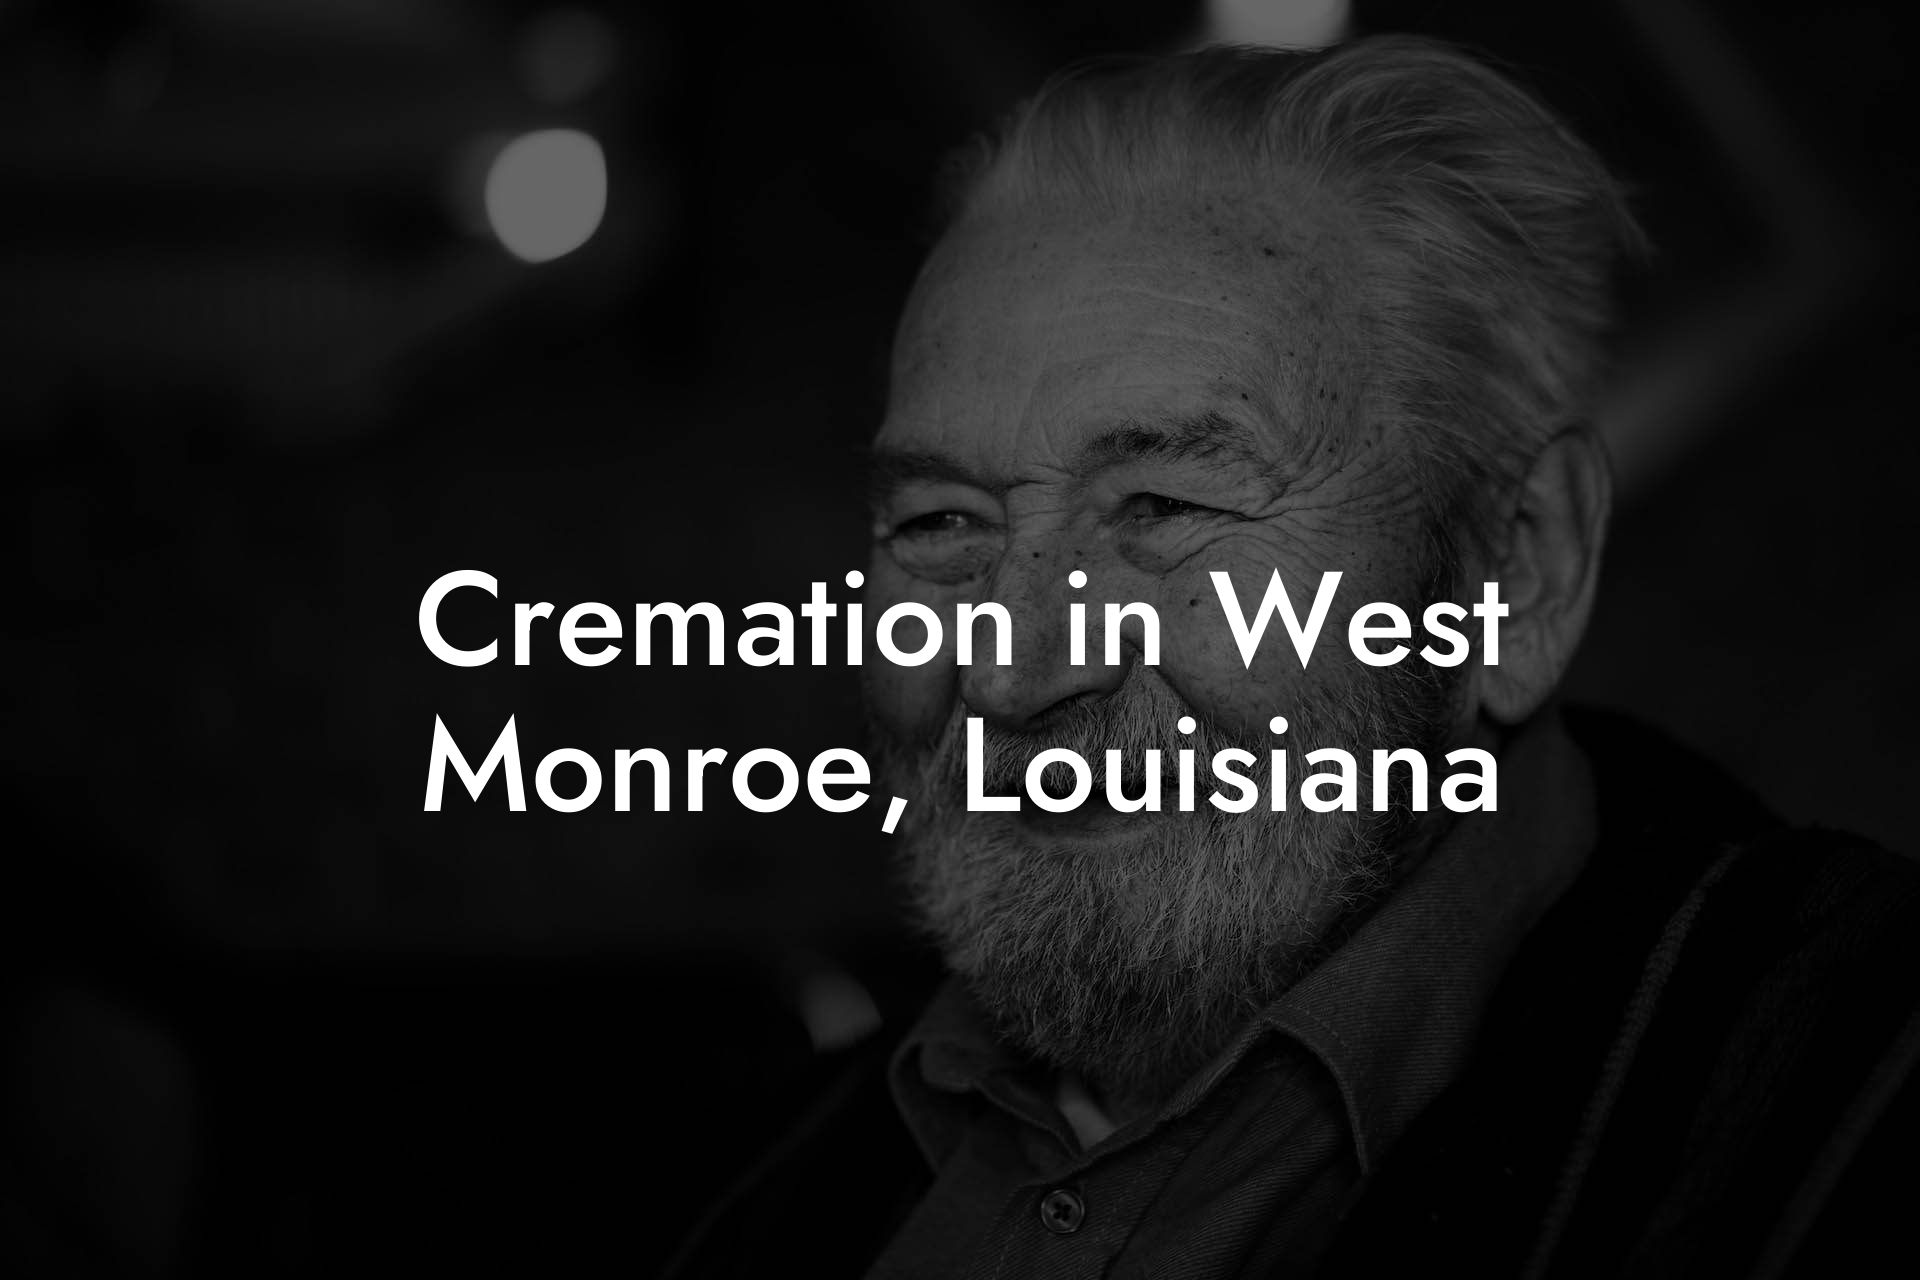 Cremation in West Monroe, Louisiana